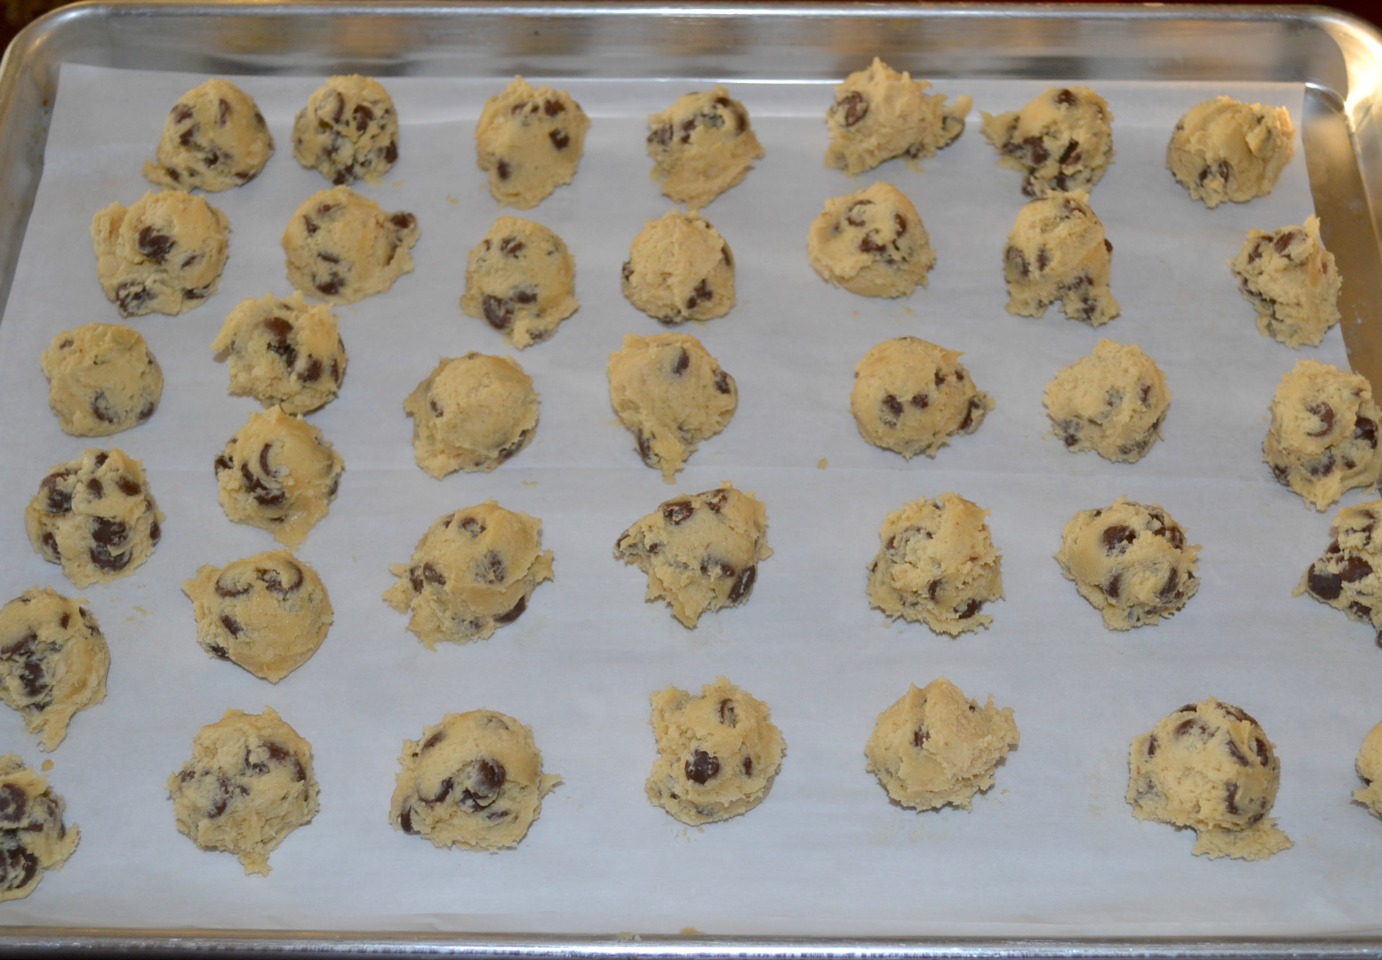 Preparing freezer cookie dough balls ahead of time allows you to bake fresh, homemade cookies in minutes with no mess